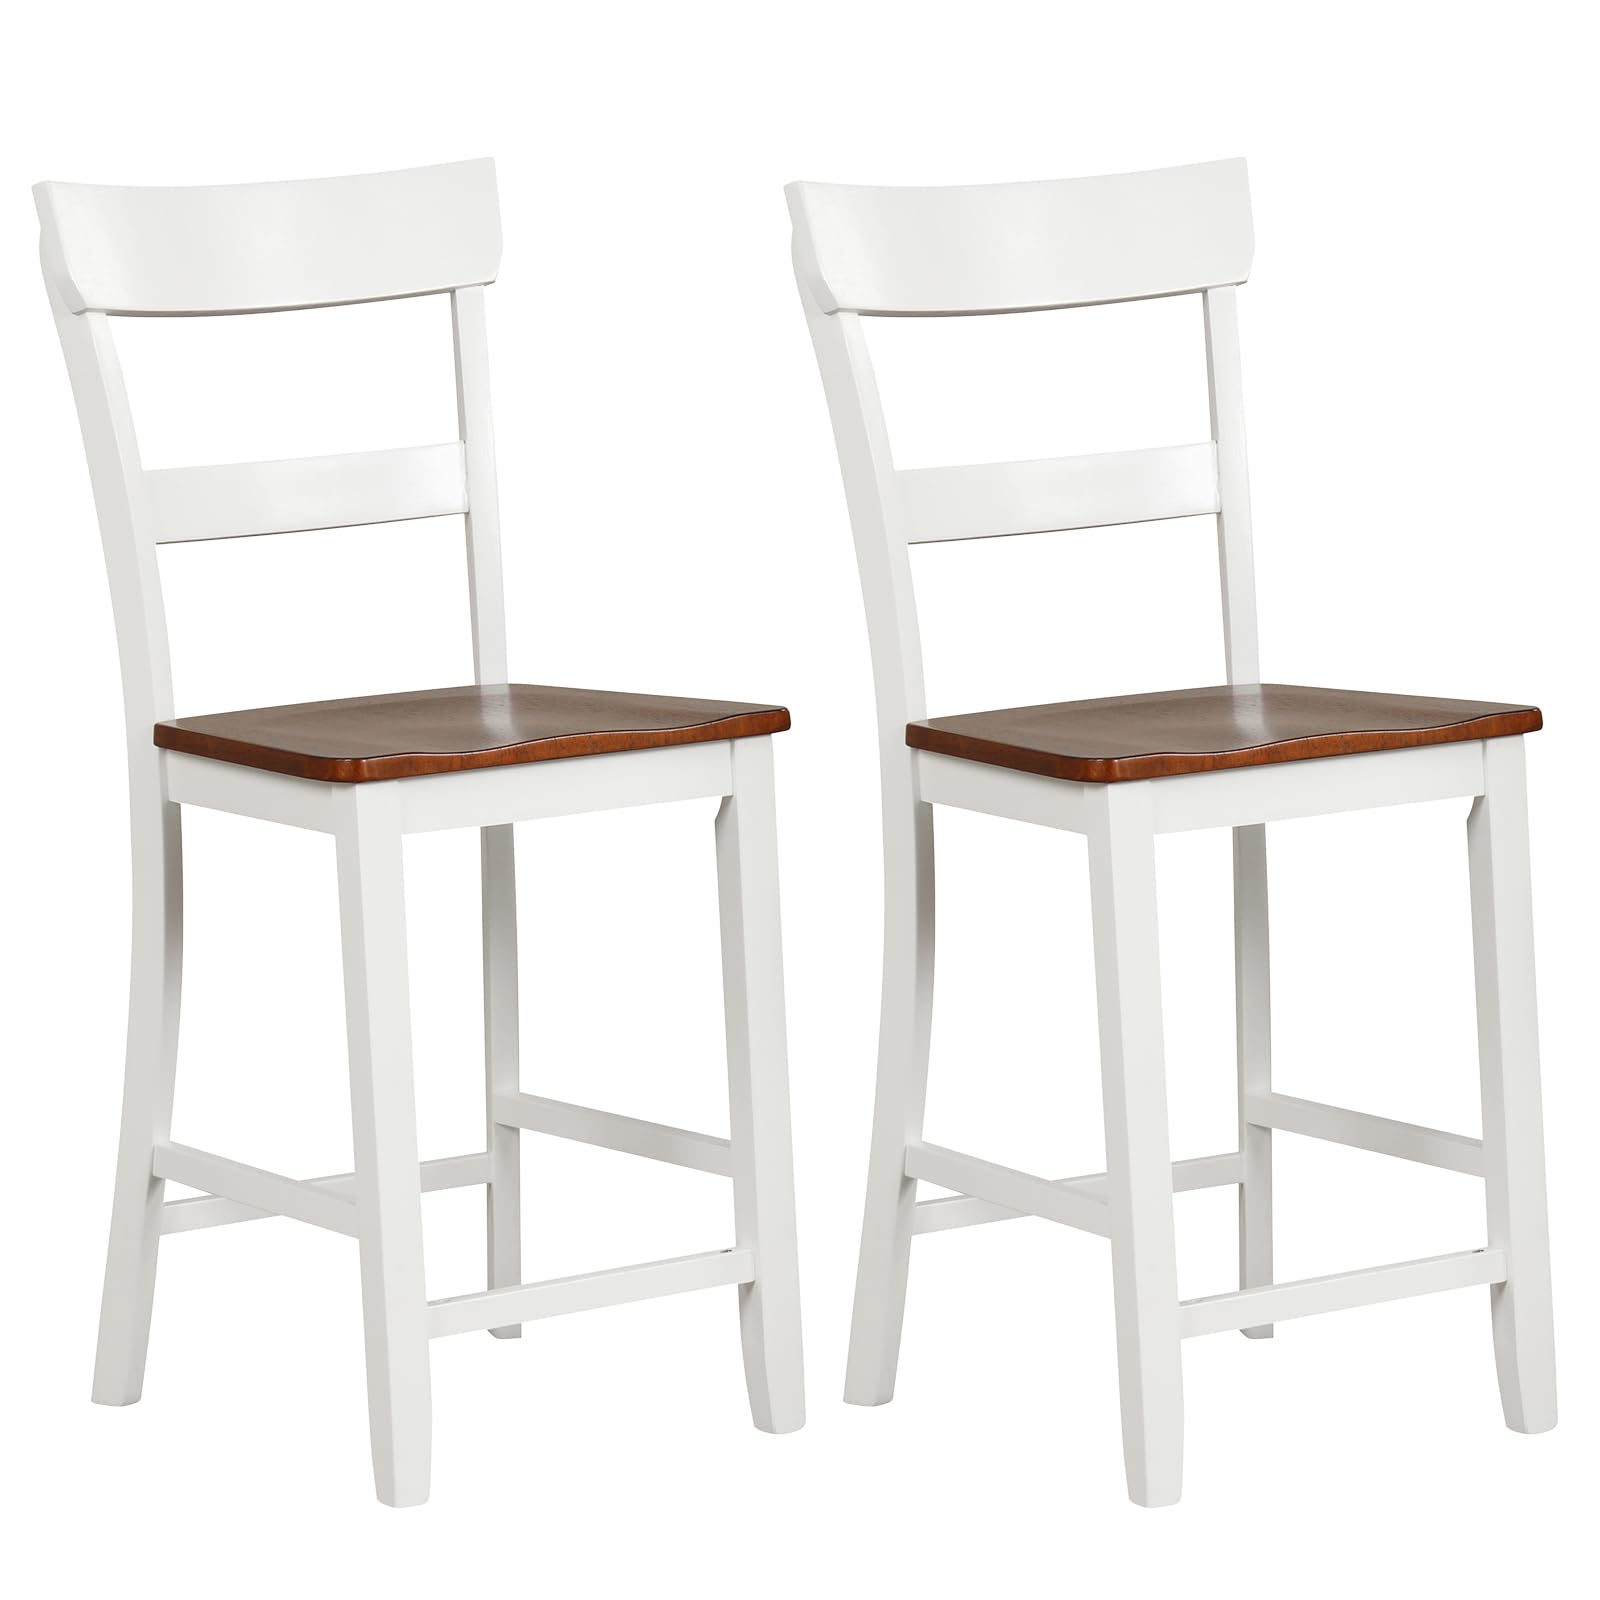 Giantex Wooden Bar Stools Counter Height Set of 2, 24.5" Farmhouse Wood Bar Dining Chairs